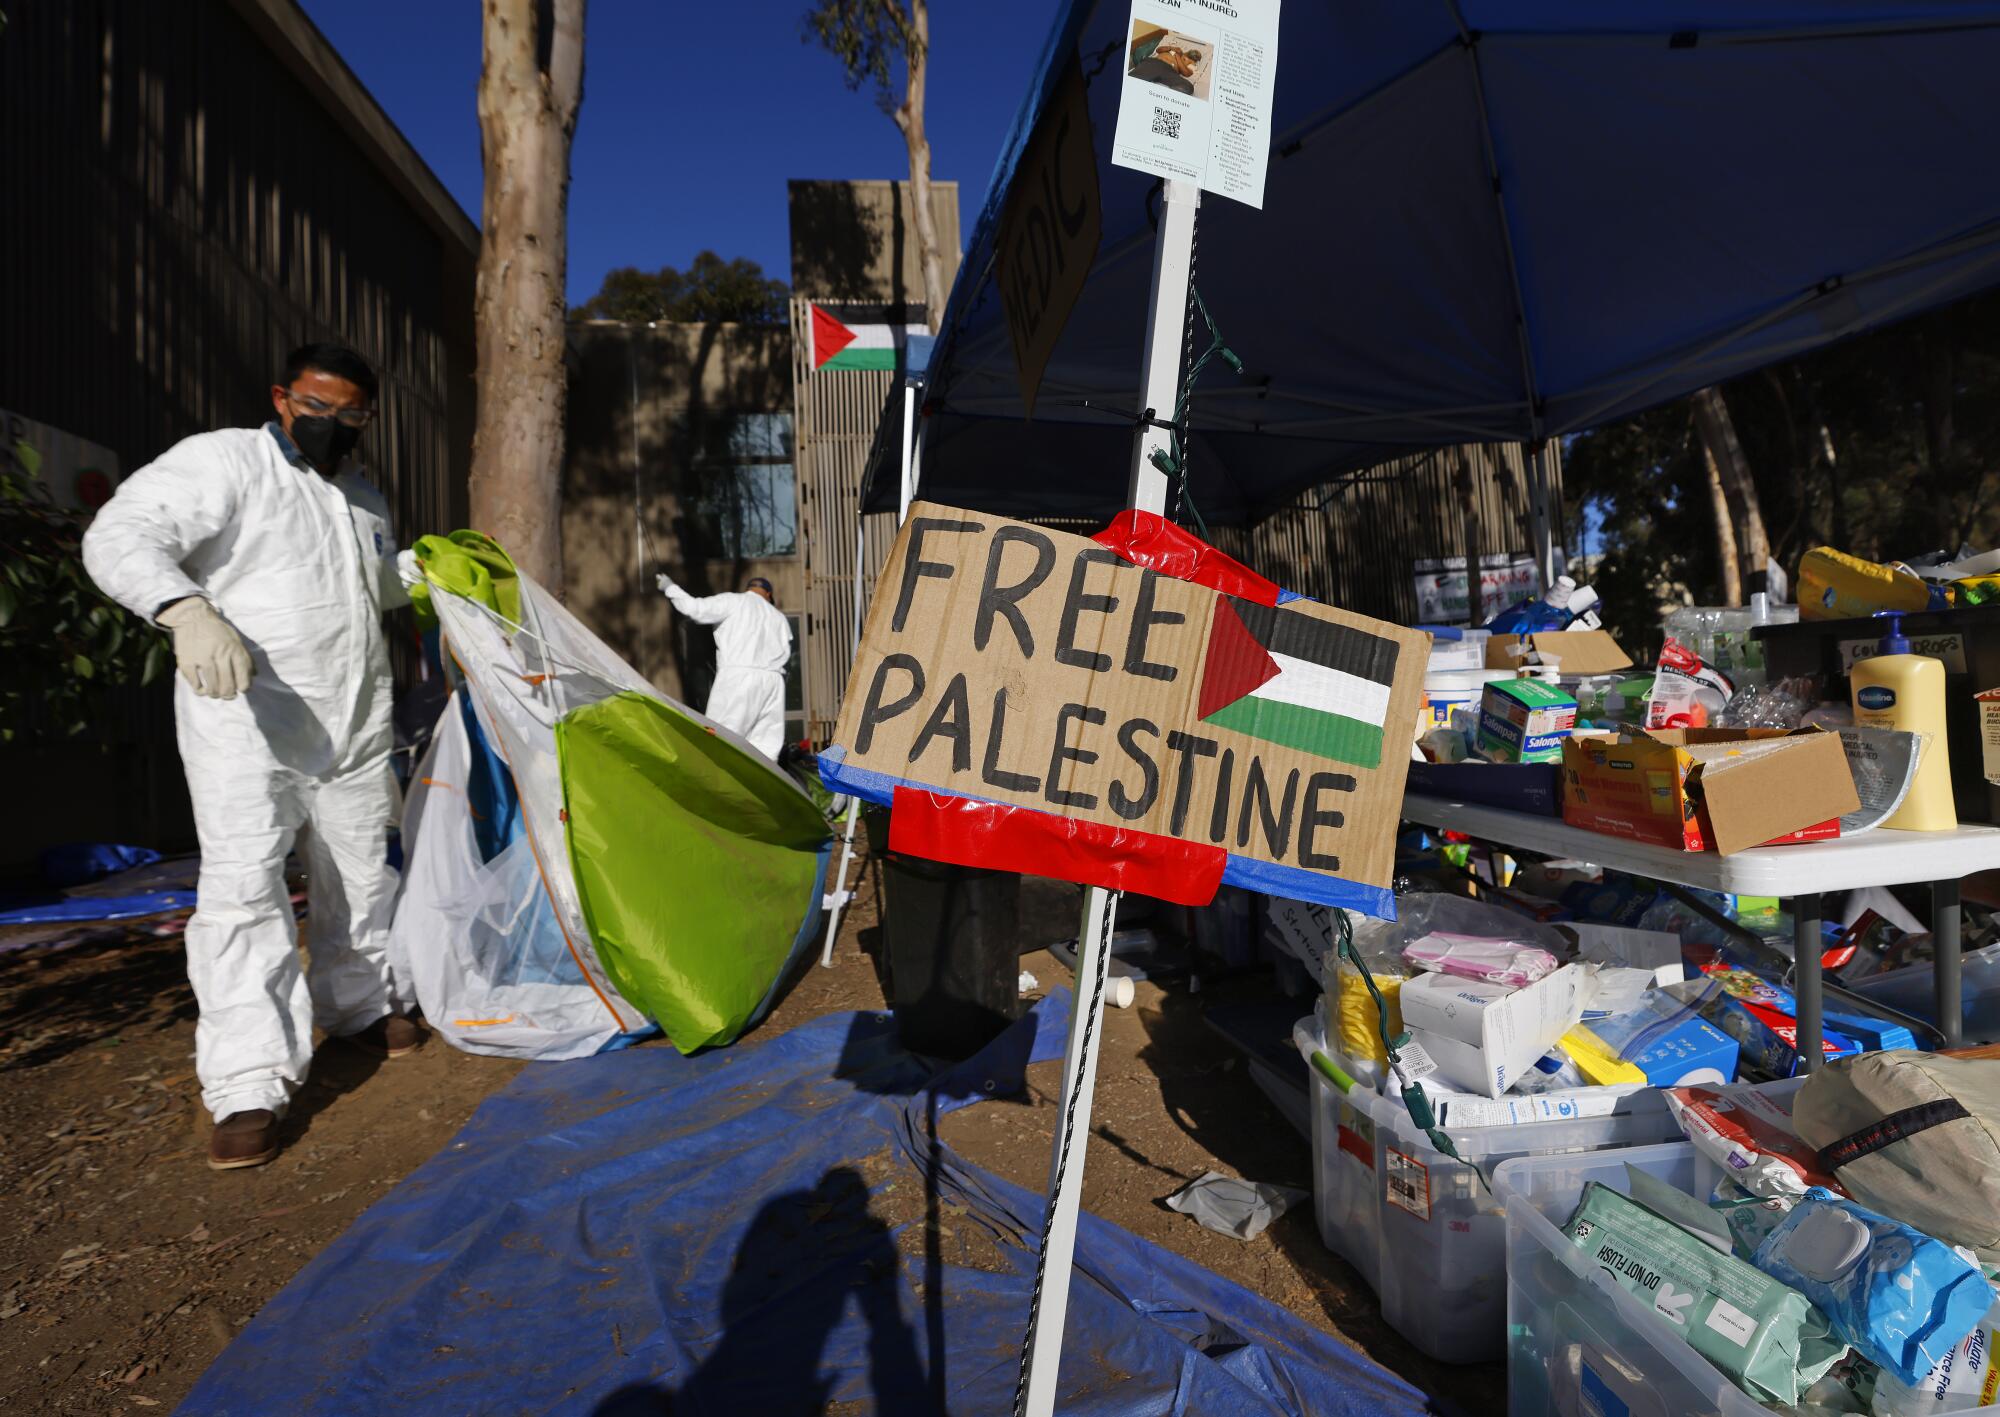 Workers clean up debris at a Free Palestine Camp along Library Walk at UC San Diego after law enforcement broke it up.